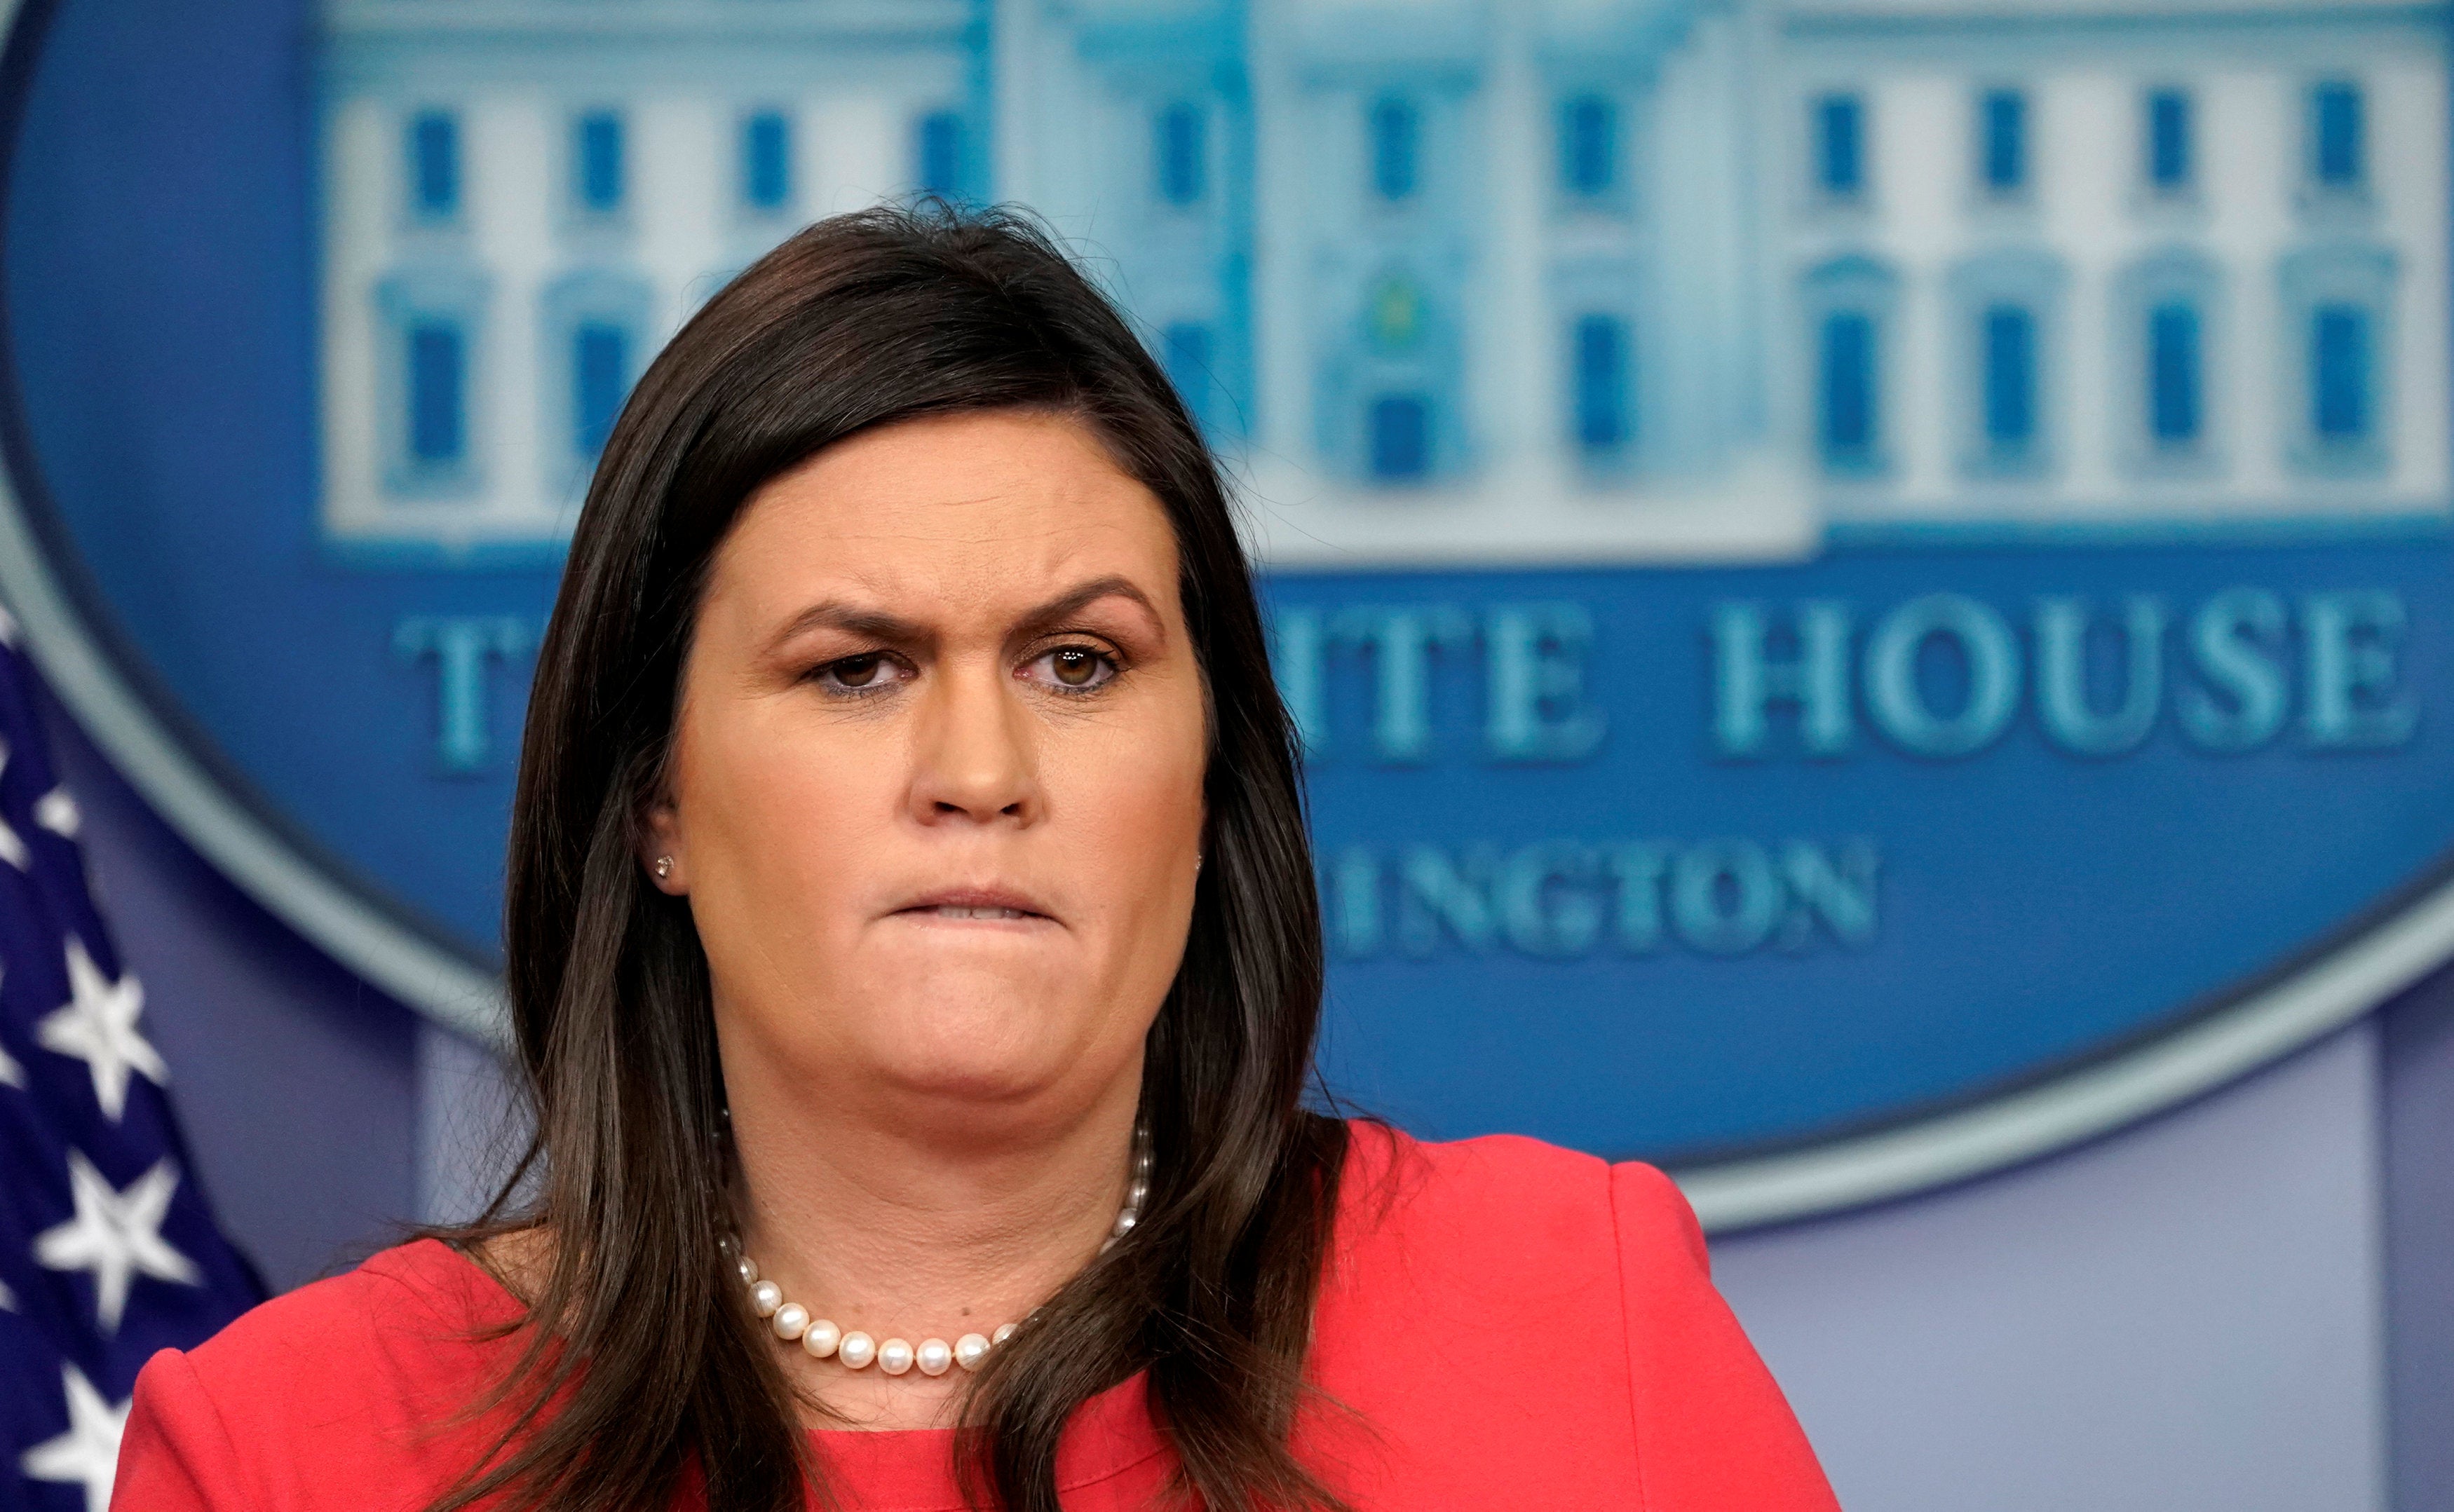 Sarah Sanders holds a press briefing at the White House in Washington